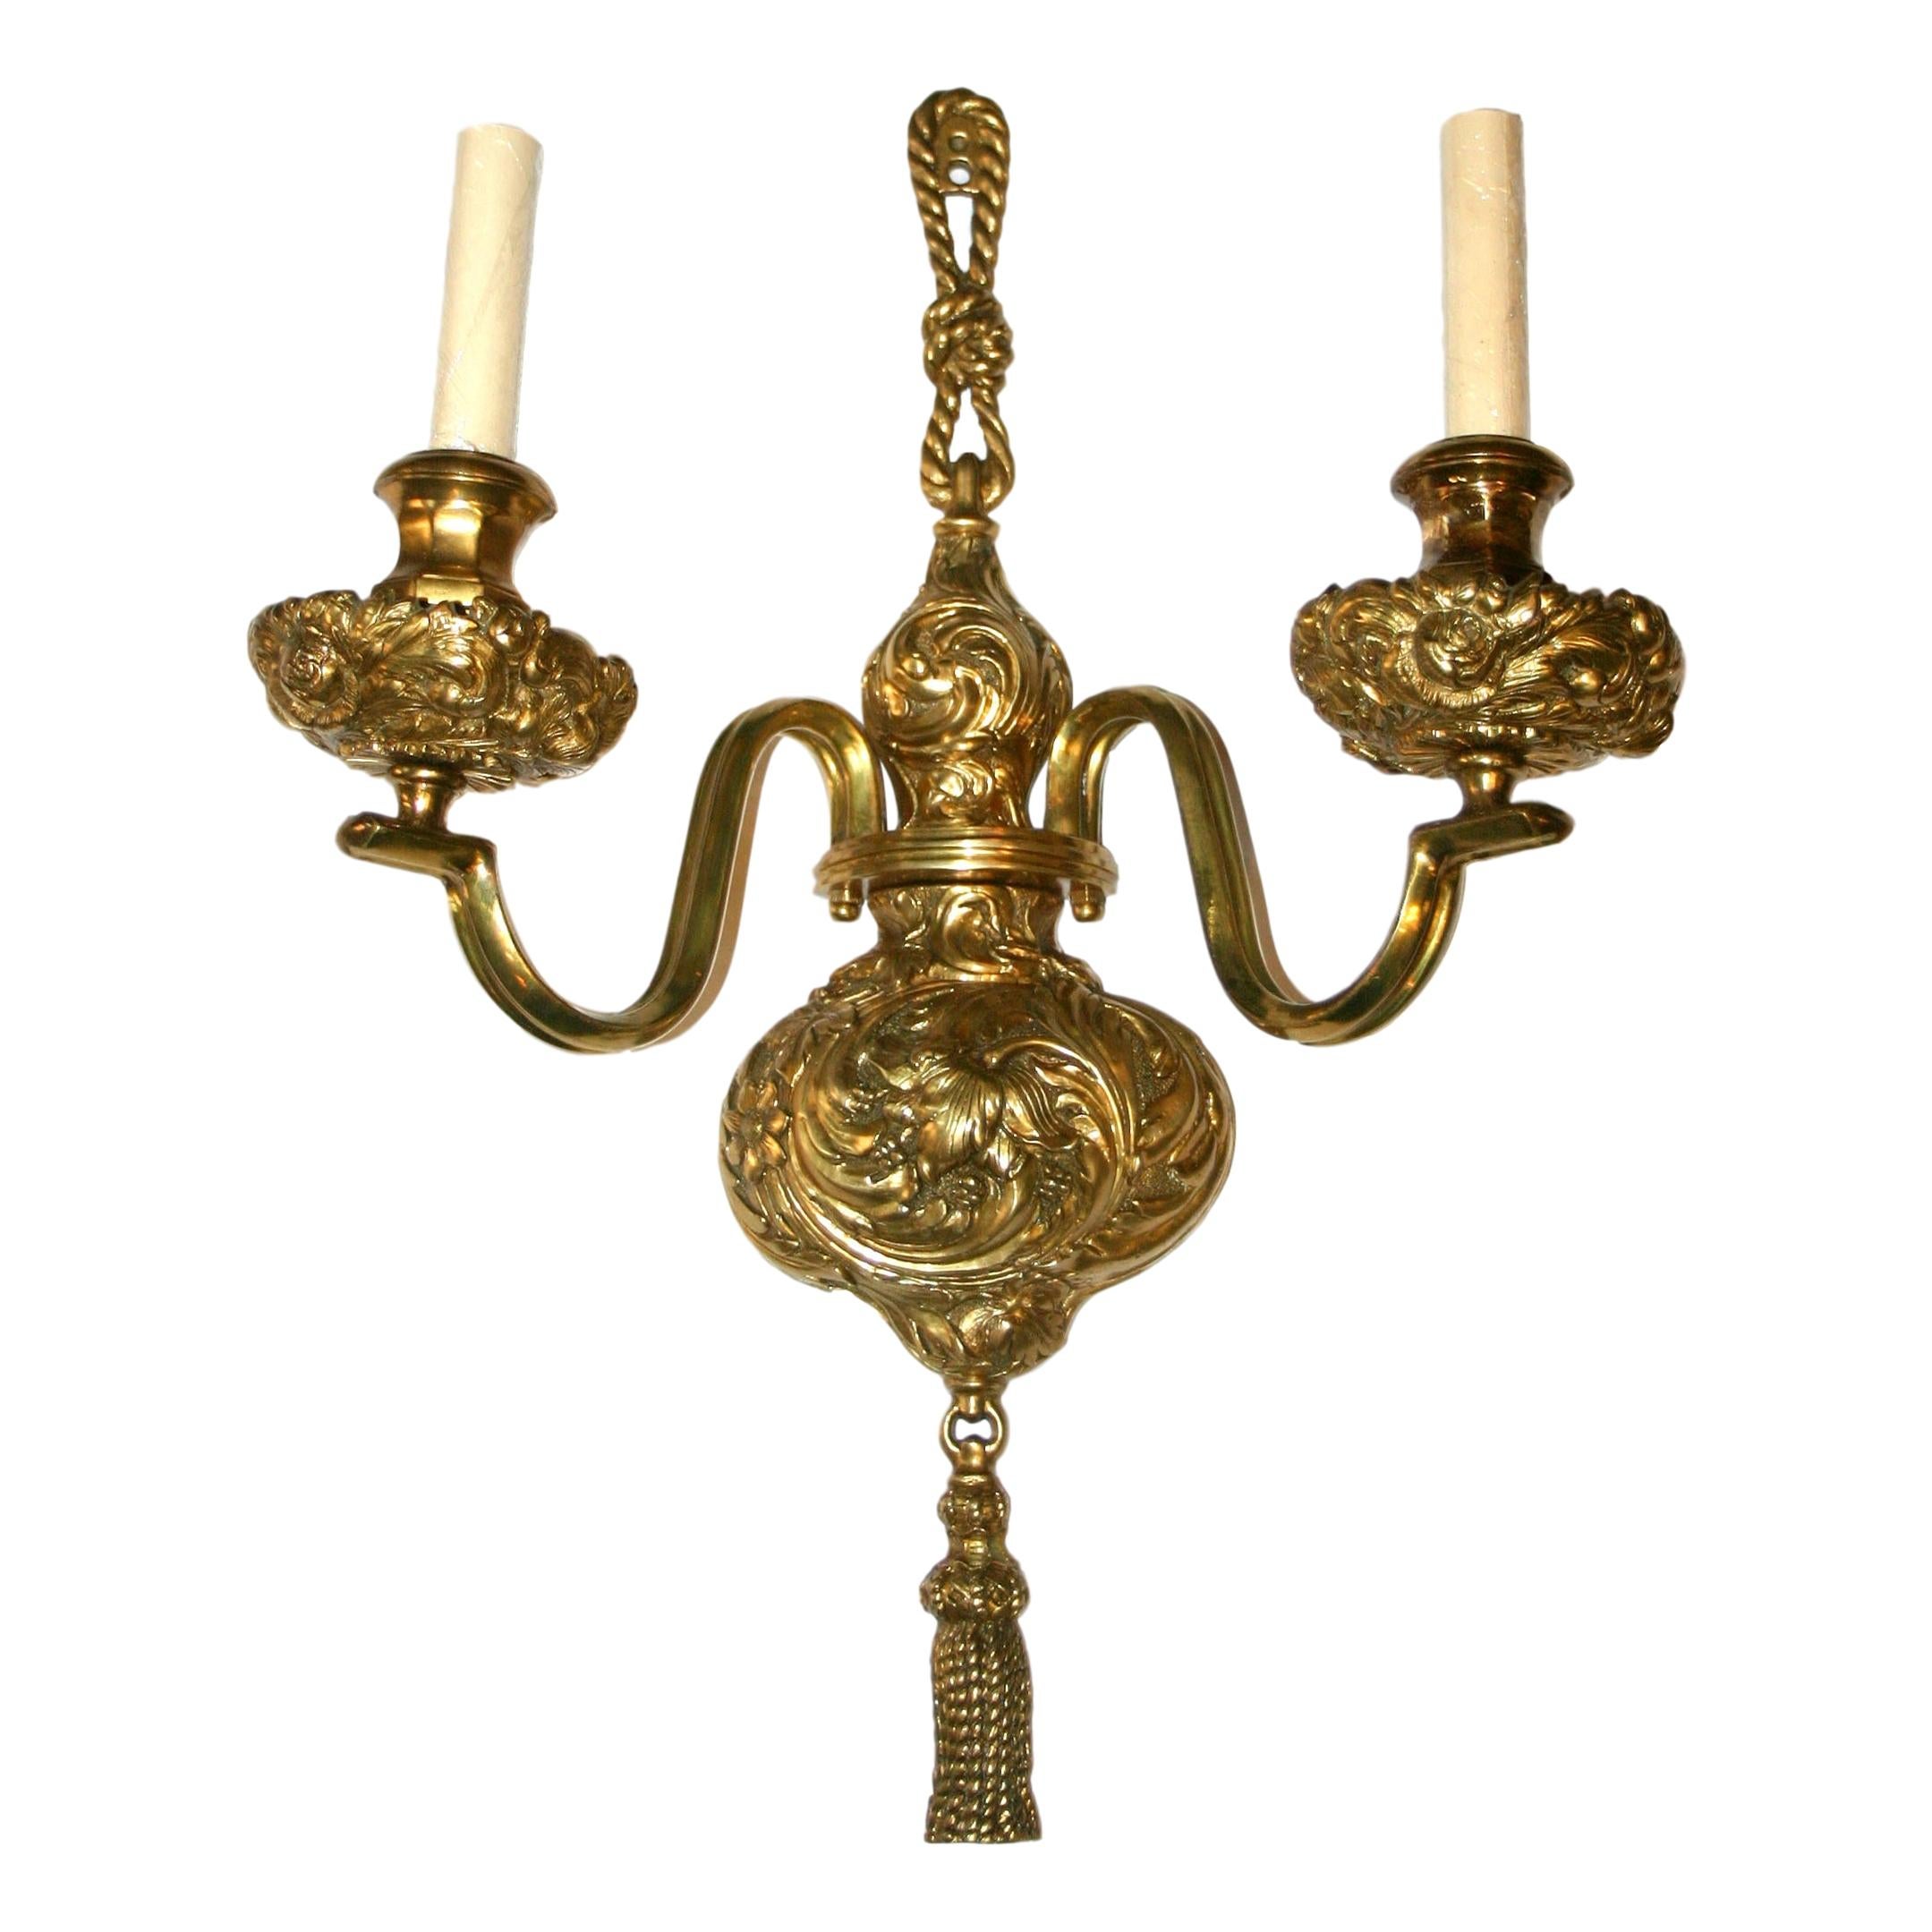 A set of 4 circa 1910 gilt bronze American sconces with gilt finish, foliage motif on body and with tassels detail at bottom. Sold in pairs.

Measurements:
Height 22.5